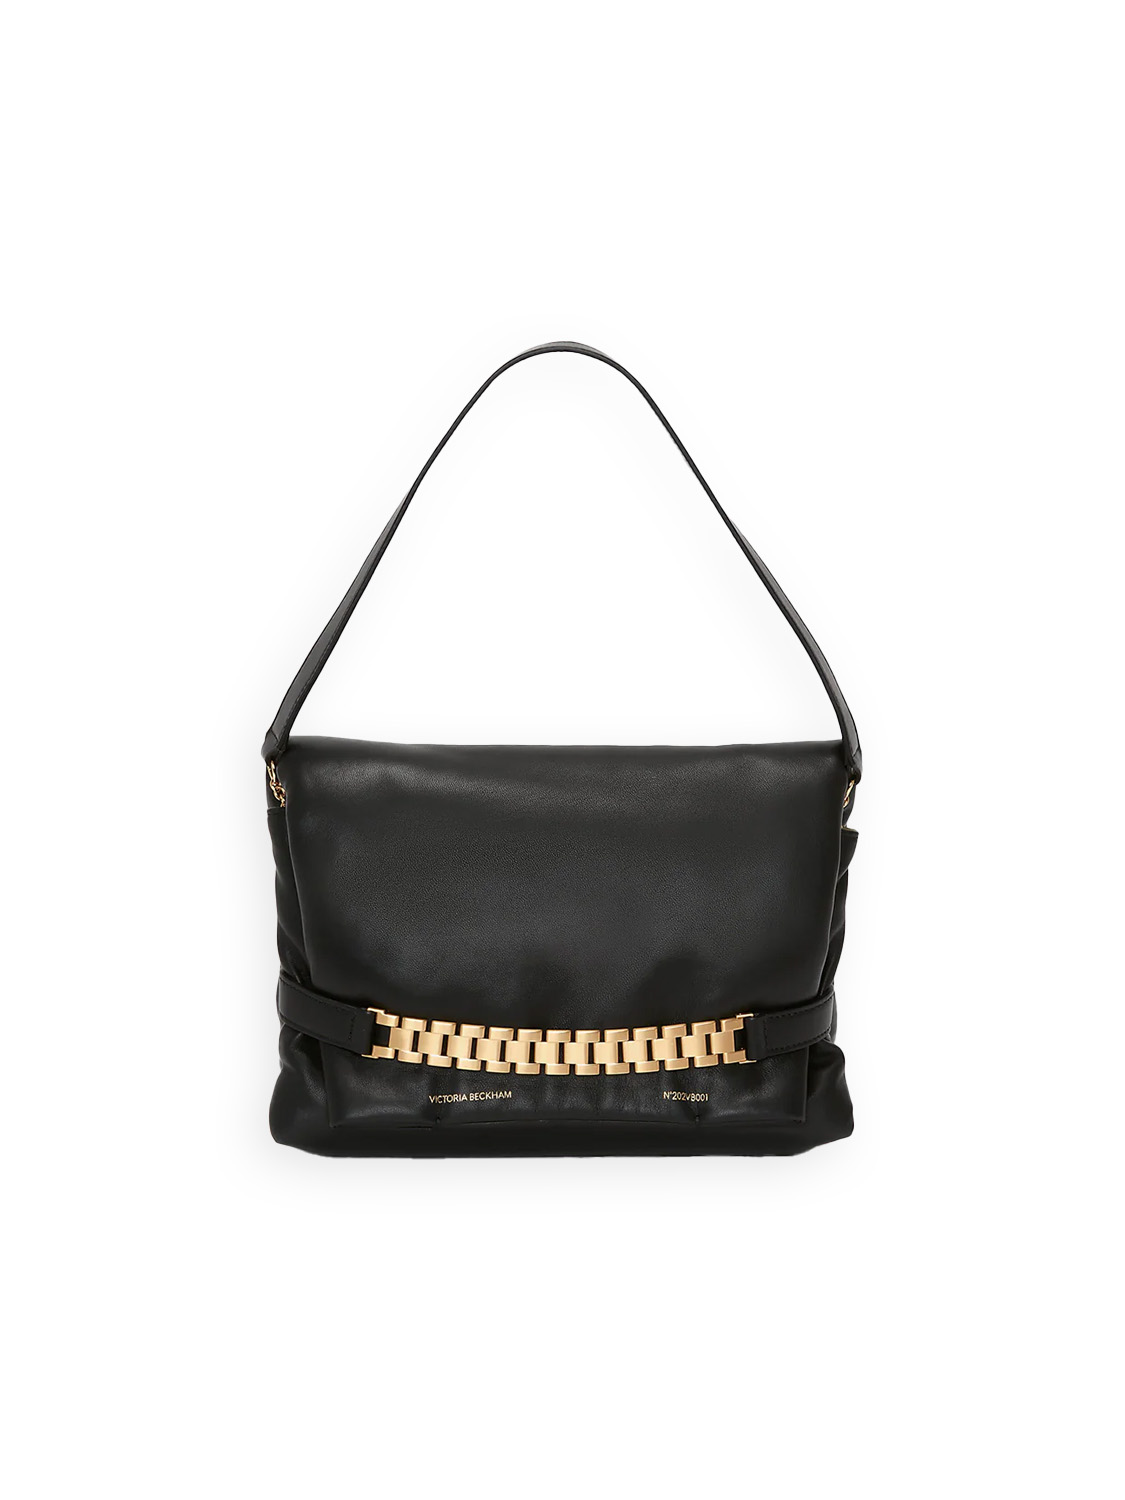 Victoria Beckham Puffy Chain Pouch – leather shoulder bag  black One Size